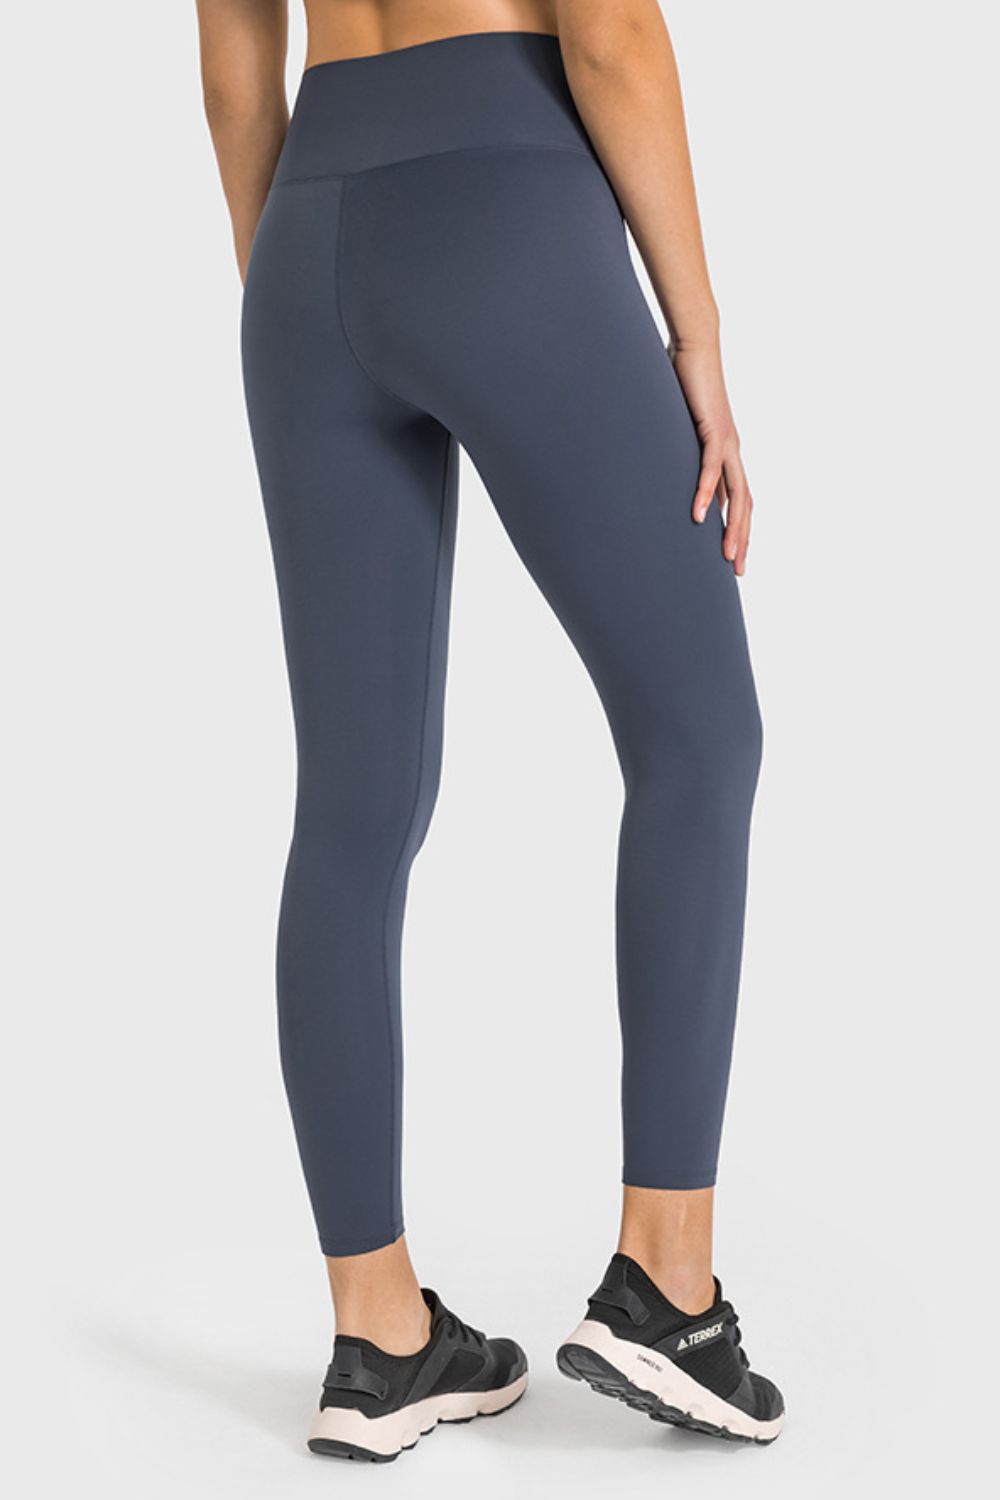 Wide High-Waist Cropped Athletic Yoga Legging Pants